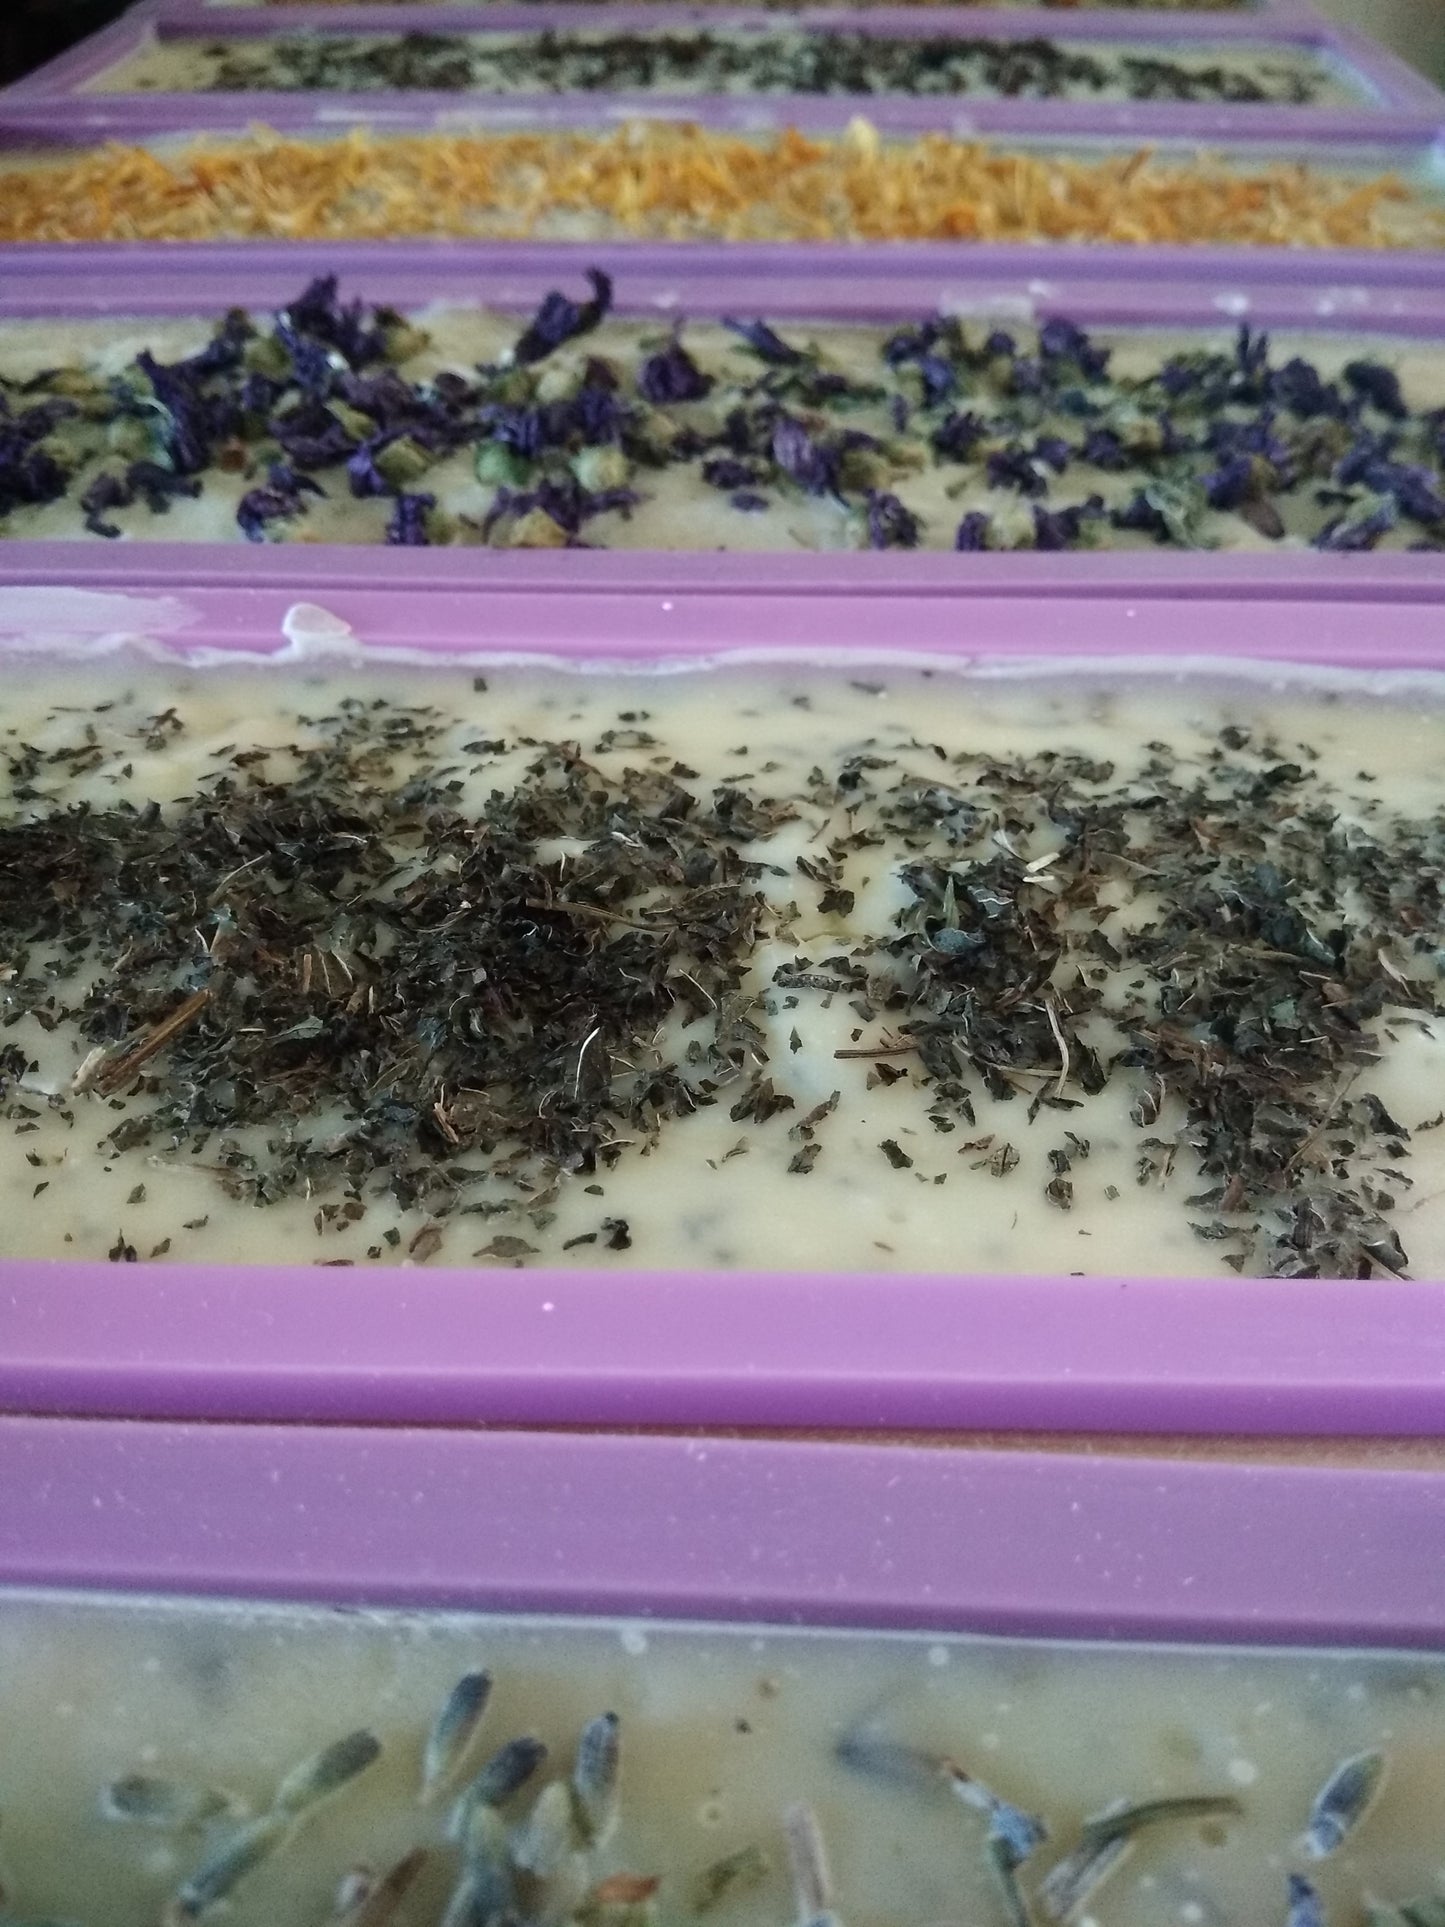 Organic Certified Solid Soap - Lavender & Mint with Shredded Mint Leaves 90g - Earthsenseorganics